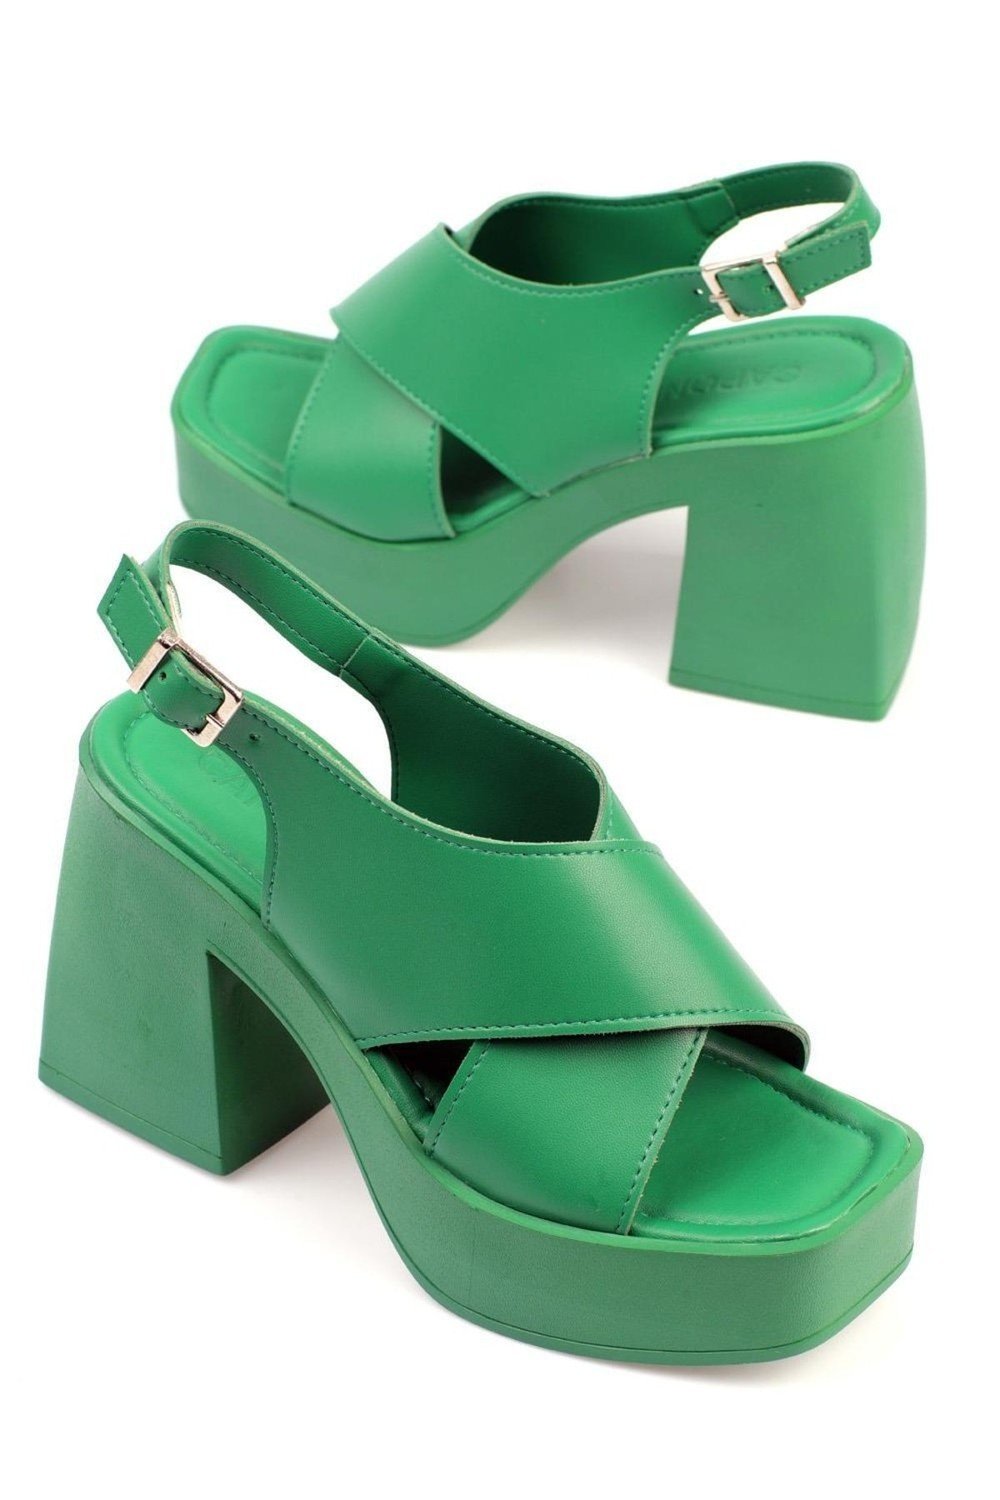 Capone Outfitters High Heels - Green - Block